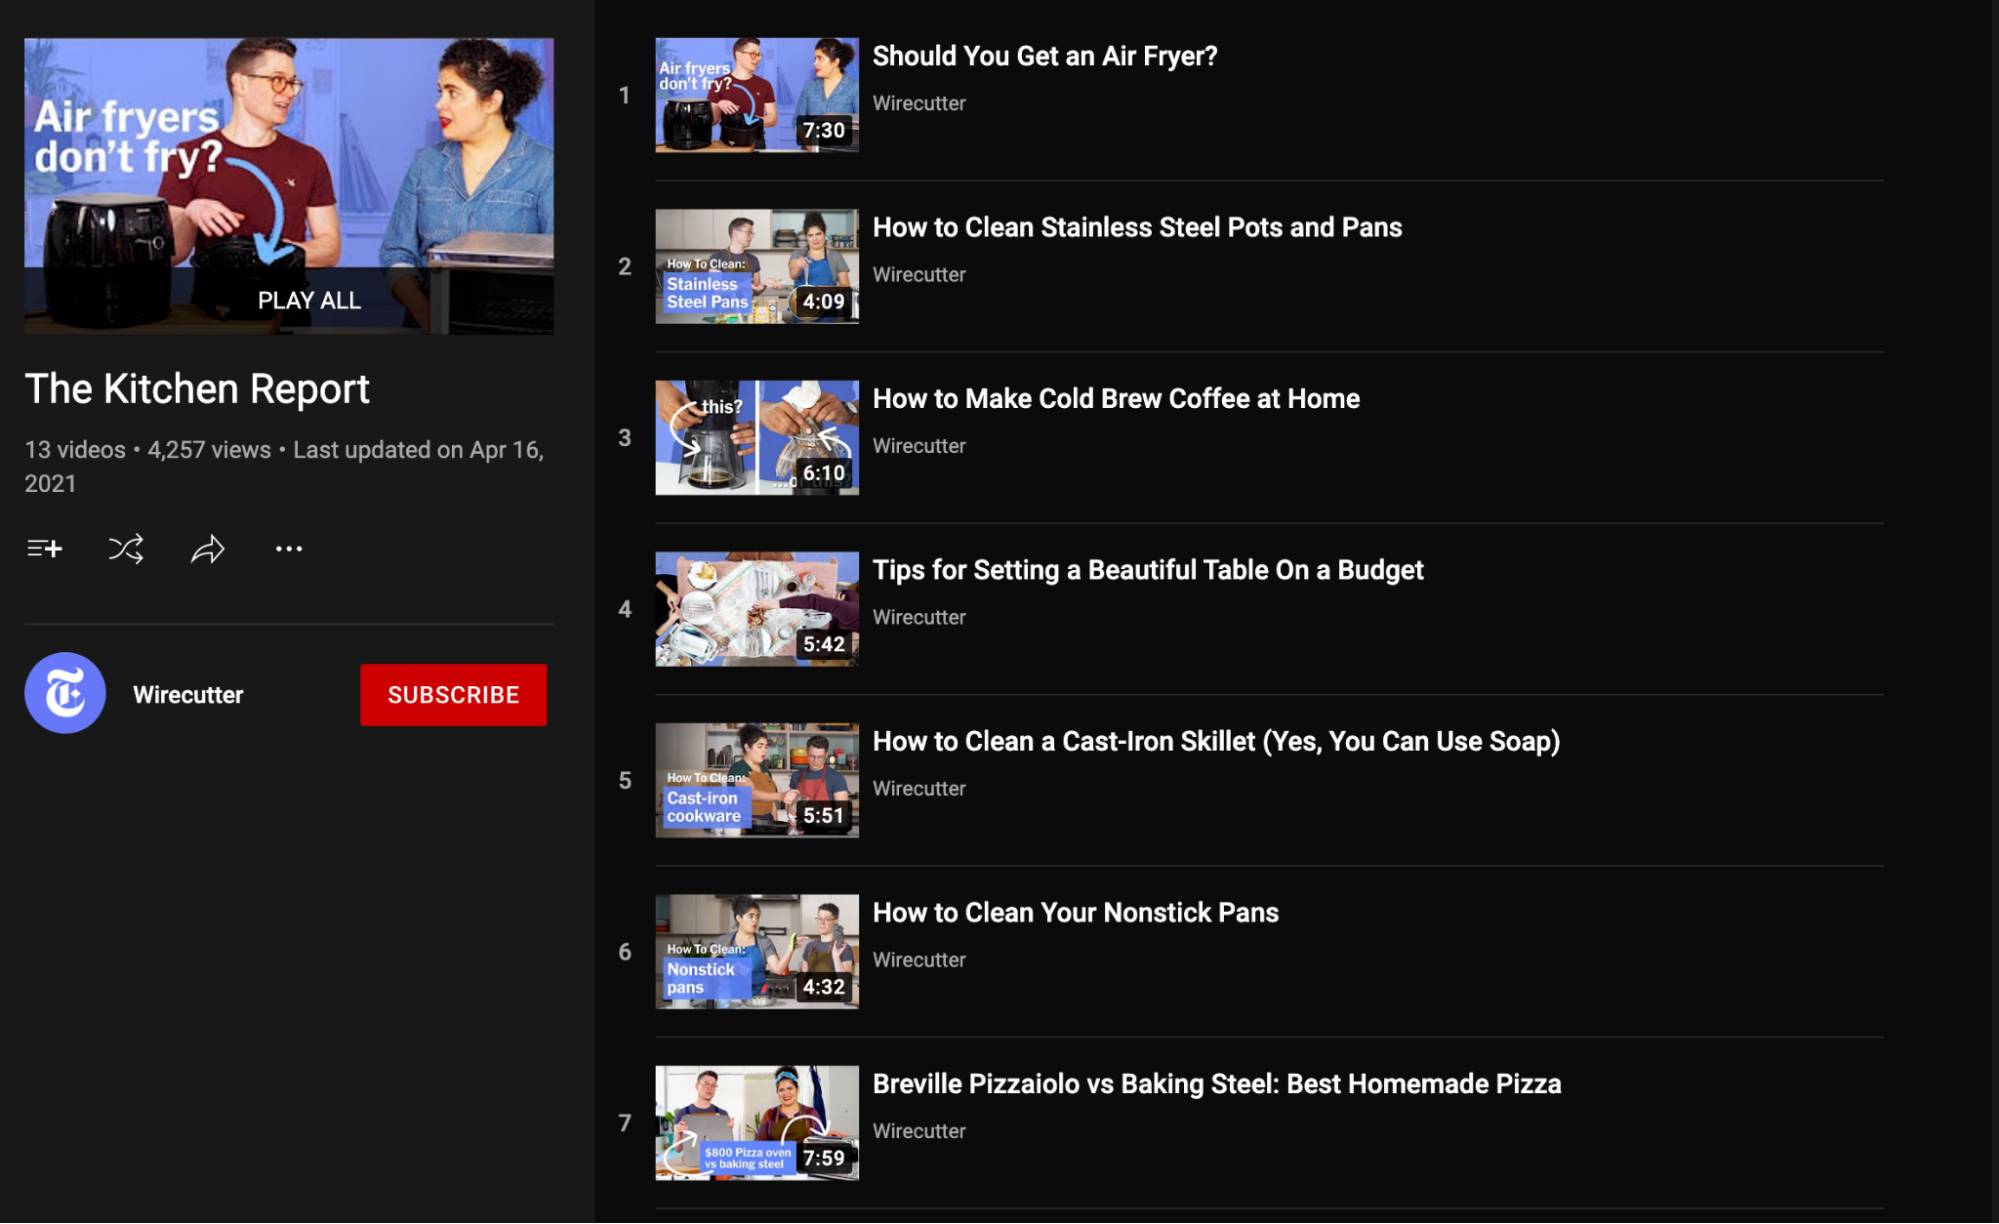 Wirecutter's YouTube video playlist for The Kitchen Report